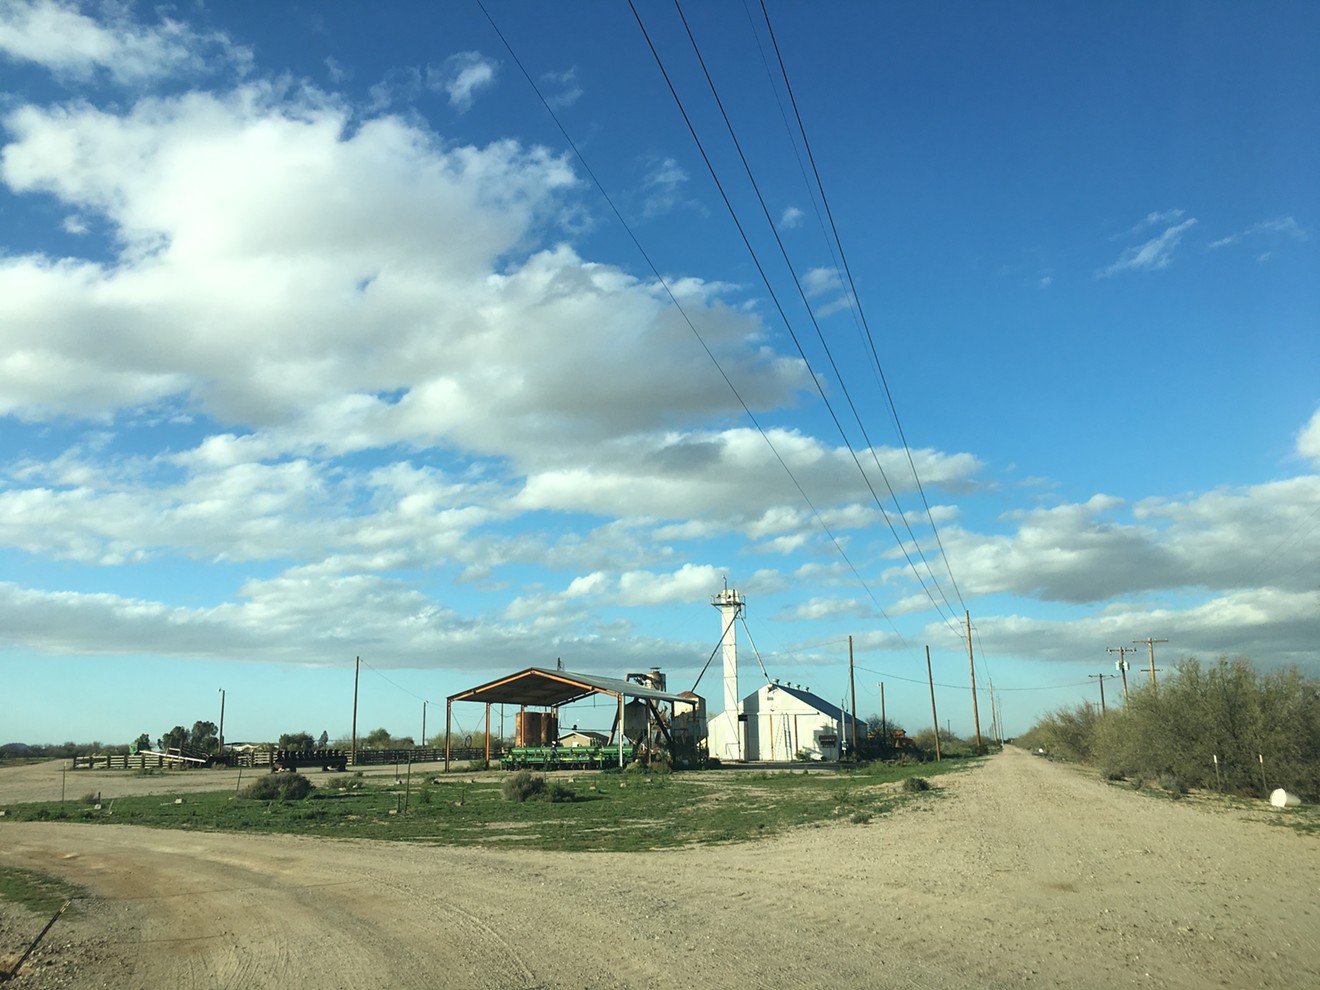 The entrance to RaT Farms, owned by Rodney and Tiffany Shedd, in Pinal County, Arizona.